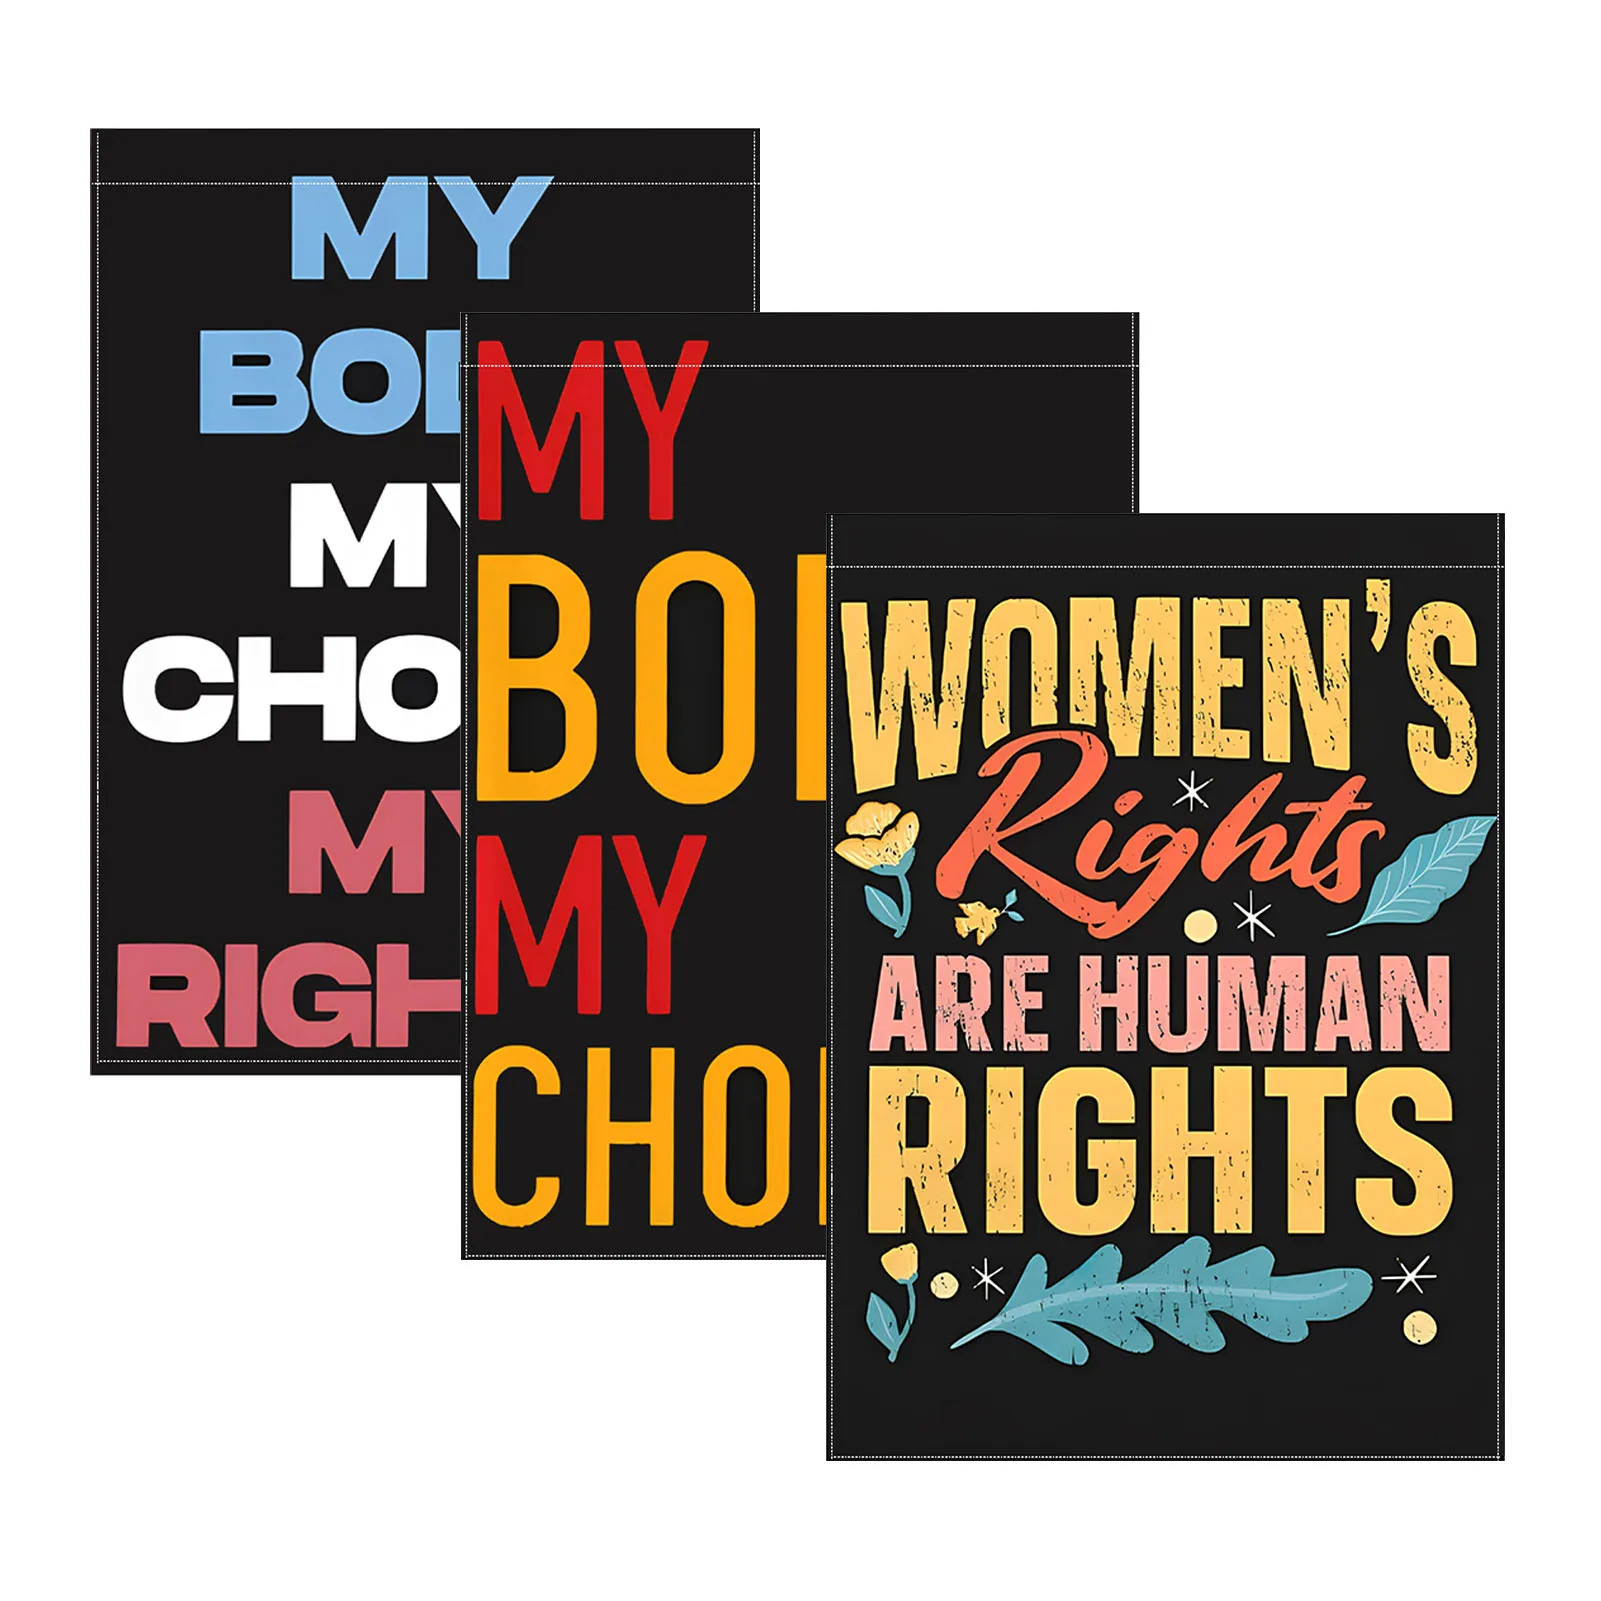 My Body My Choice Flag Women's Rights Are Human-Rights Protest-Uterus Flag Women's Rights Flag For Outside Yard Lawn Outdoor